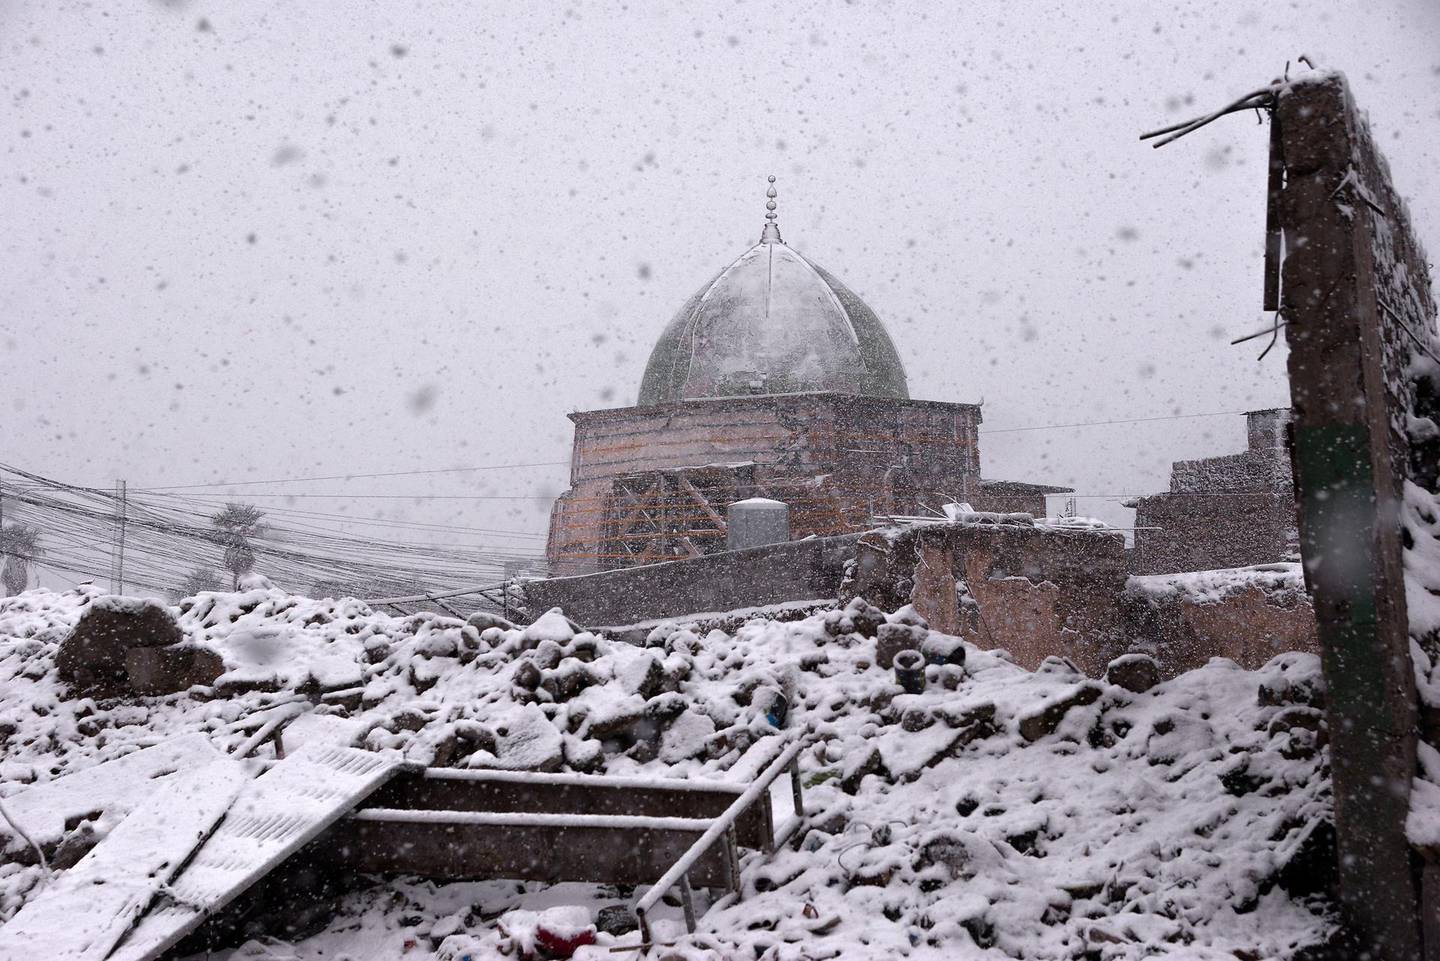 This picture taken on February 10, 2020 amidst a heavy snow storm shows a view of the dome of the Nuri mosque in the old town of Iraq's northern city Mosul, at the site heavily damaged by Islamic State (IS) group fighters in the 2017 battle for the city.  / AFP / Zaid AL-OBEIDI
